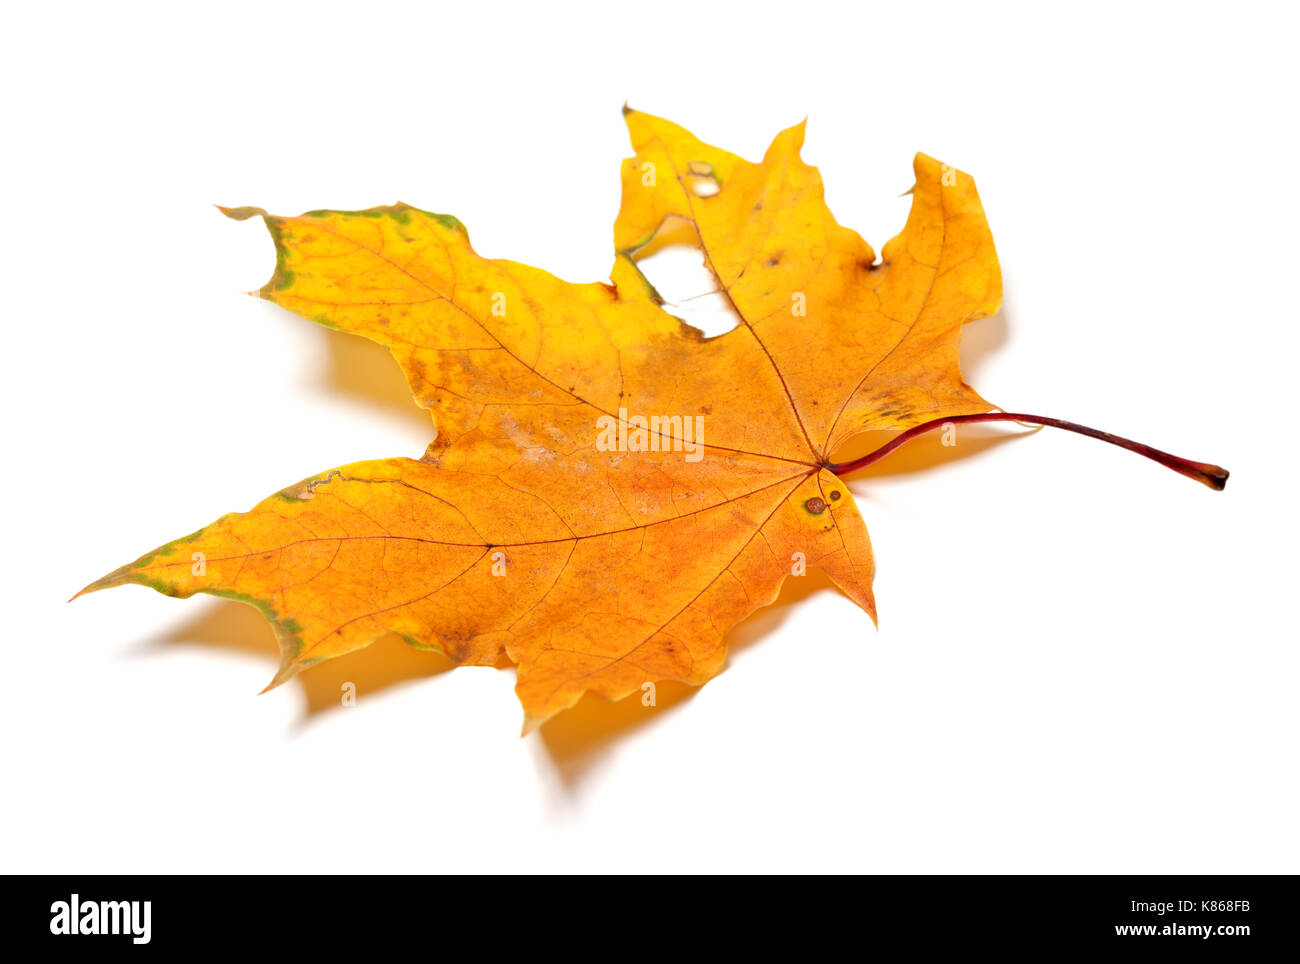 Autumn yellow dry maple leaf with holes. Isolated on white background. Stock Photo